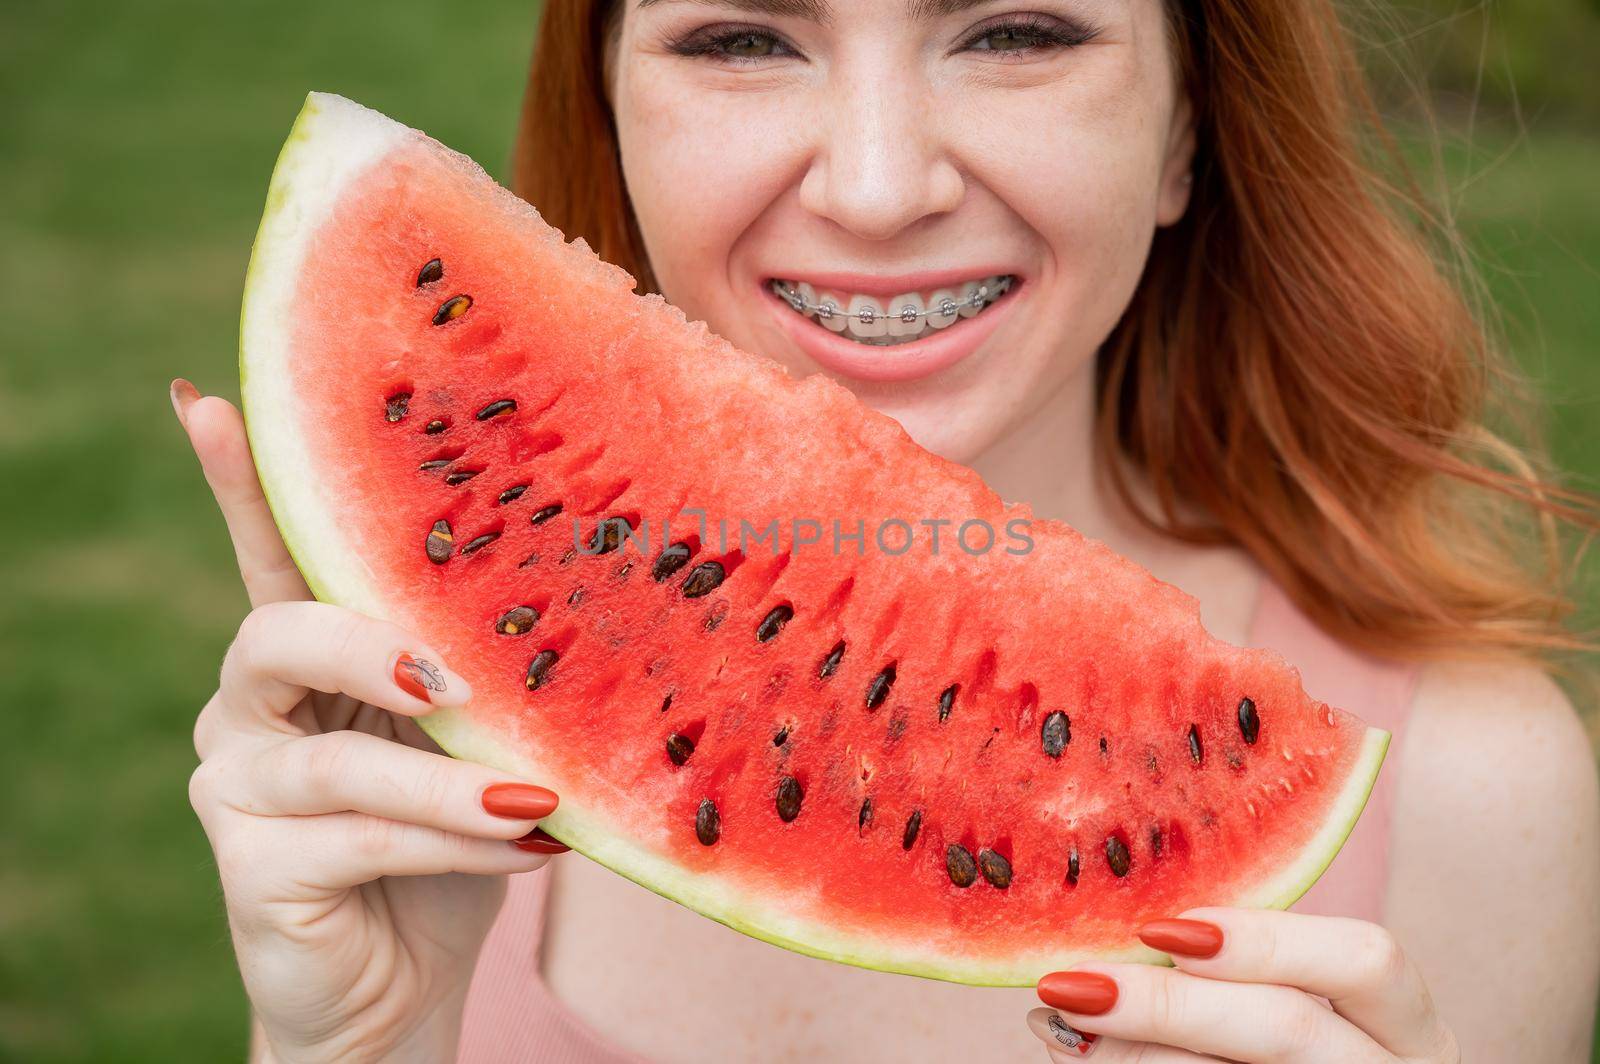 Beautiful red-haired woman smiling with braces and about to eat a slice of watermelon outdoors in summer by mrwed54